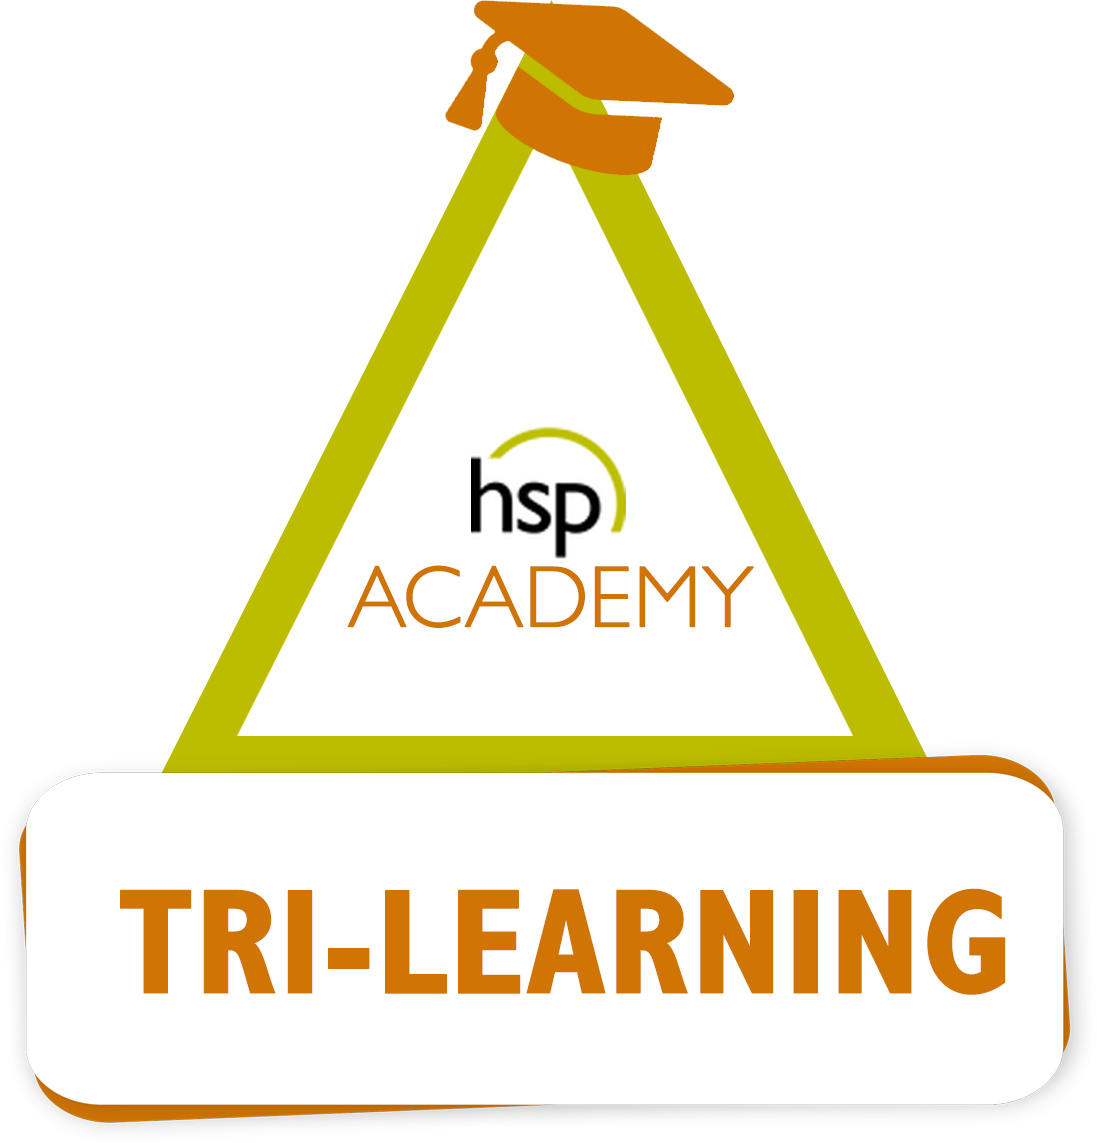 Tri-Learning